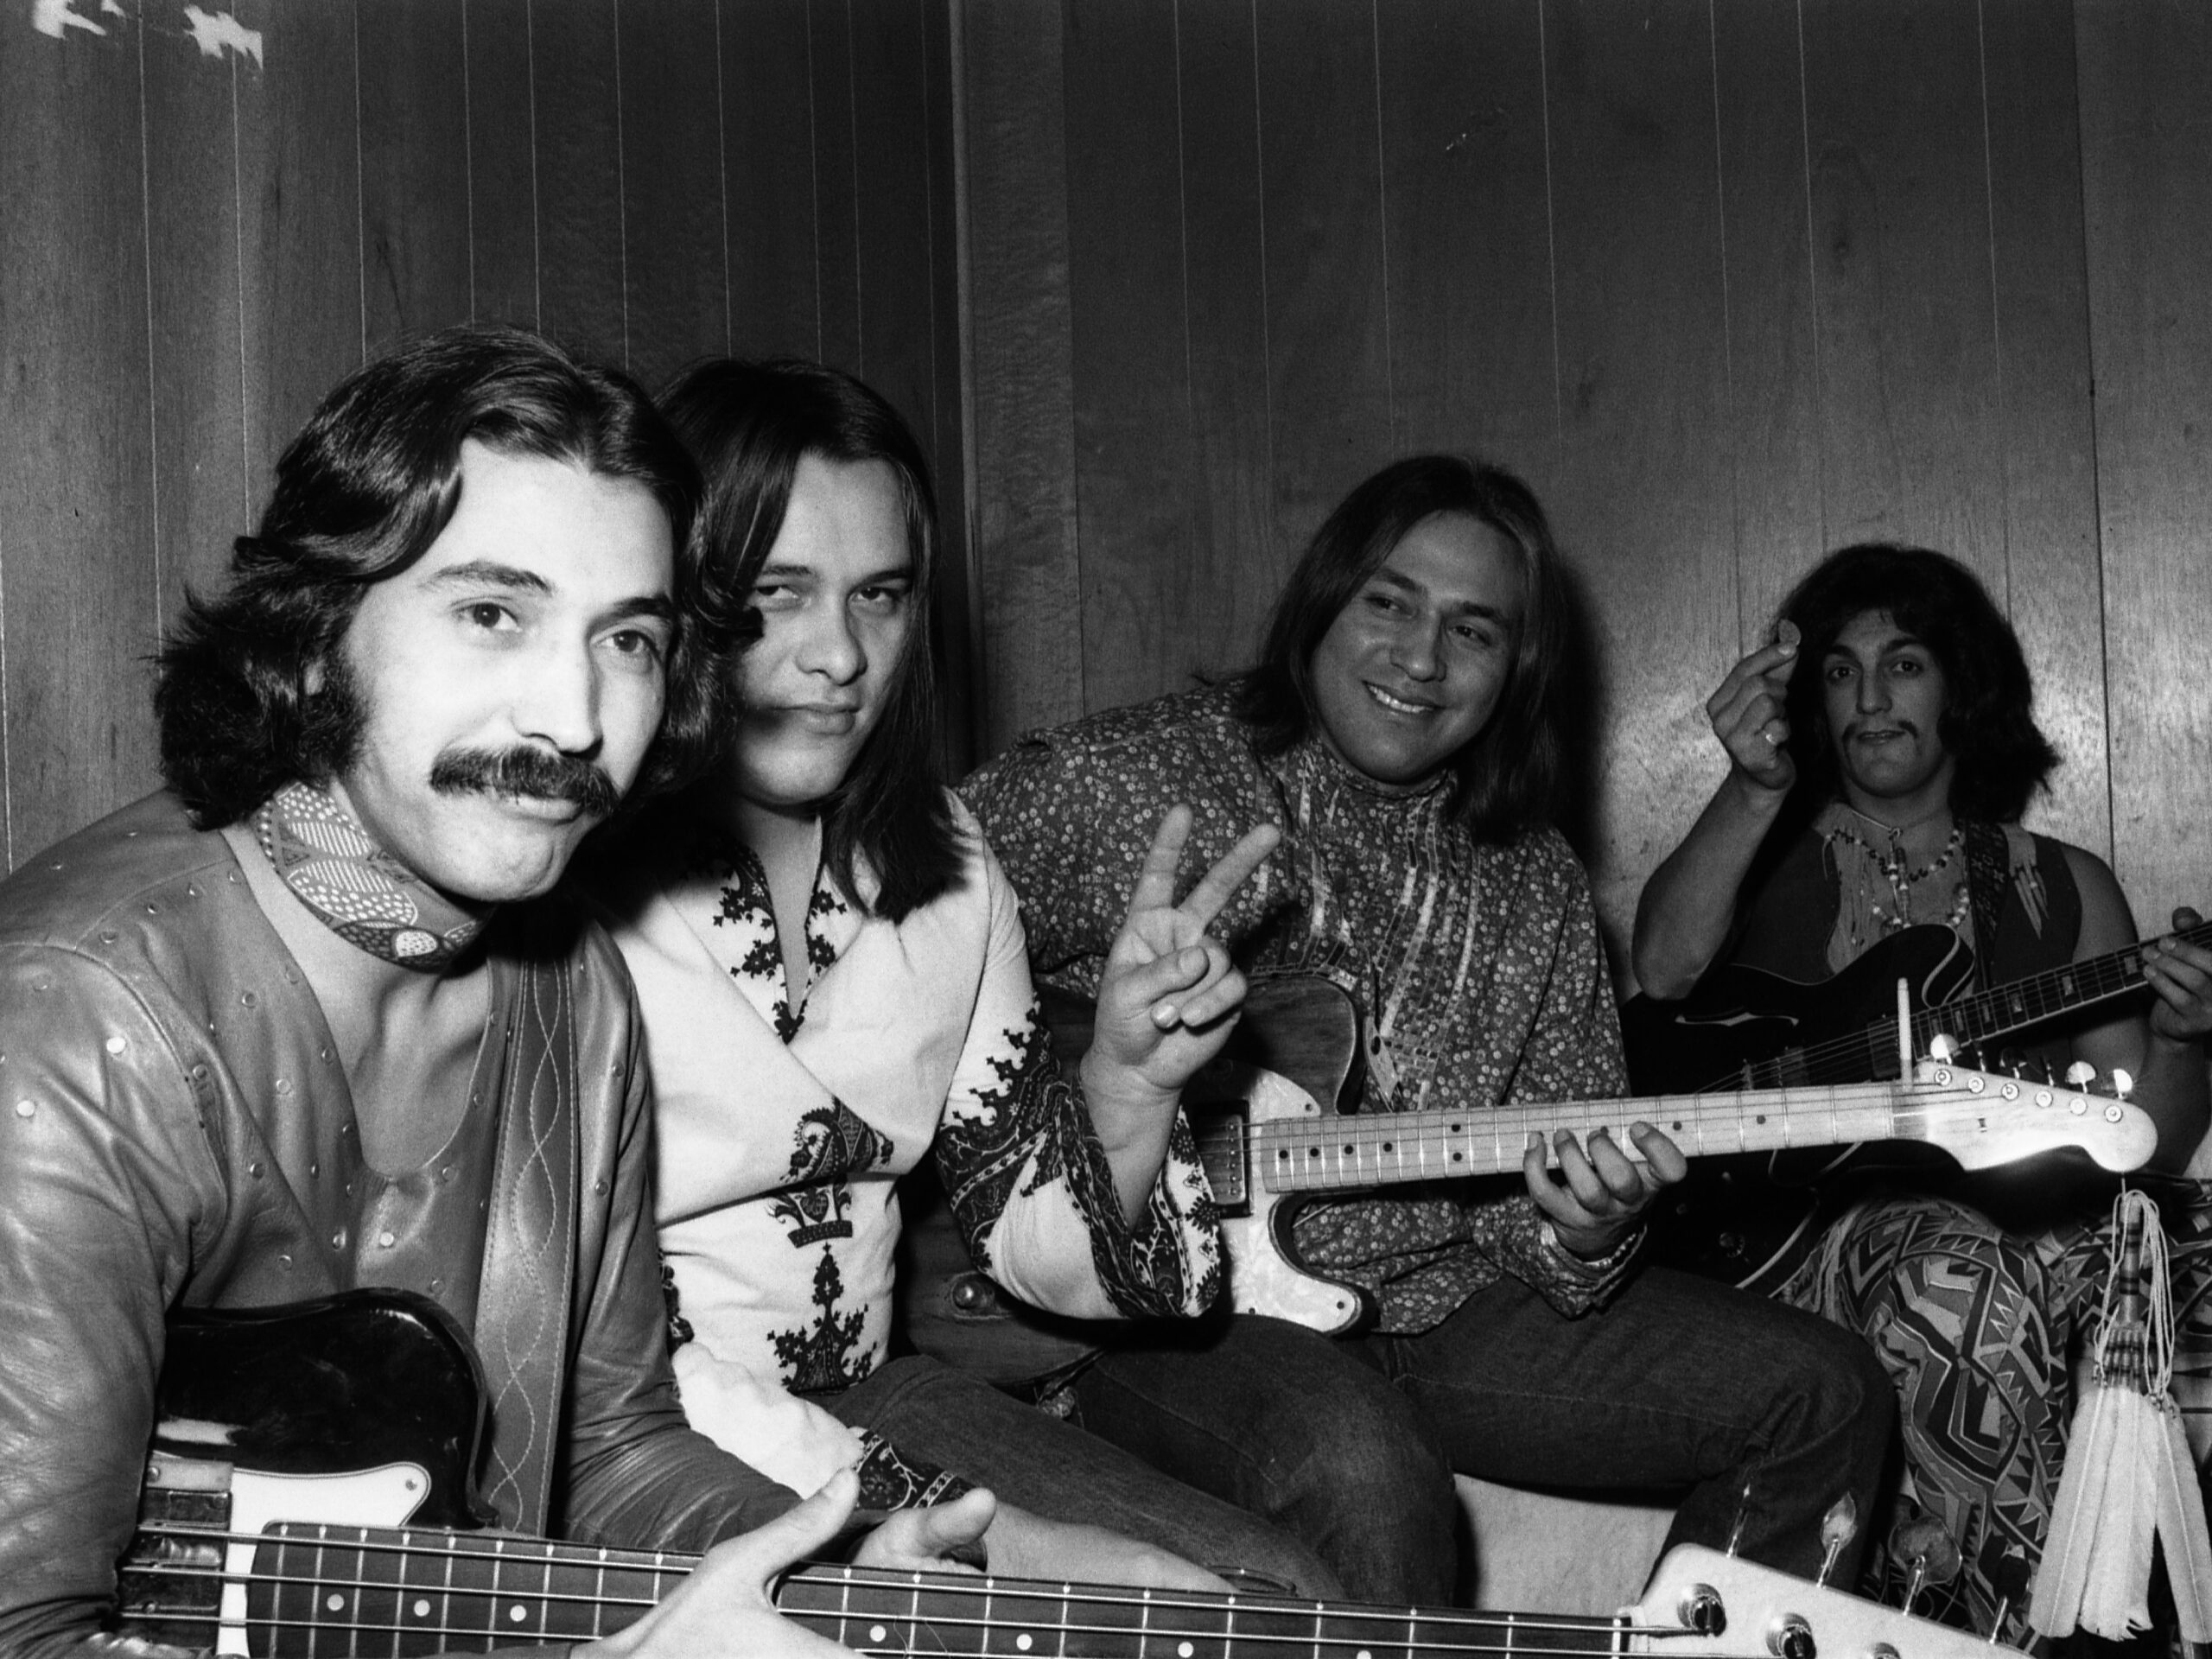 Founded by brothers Pat and Lolly Vegas, Redbone scored a Top 5 hit in 1974 with "Come and Get Your Love," launching their Indigenous style and influences into the pop conversation.